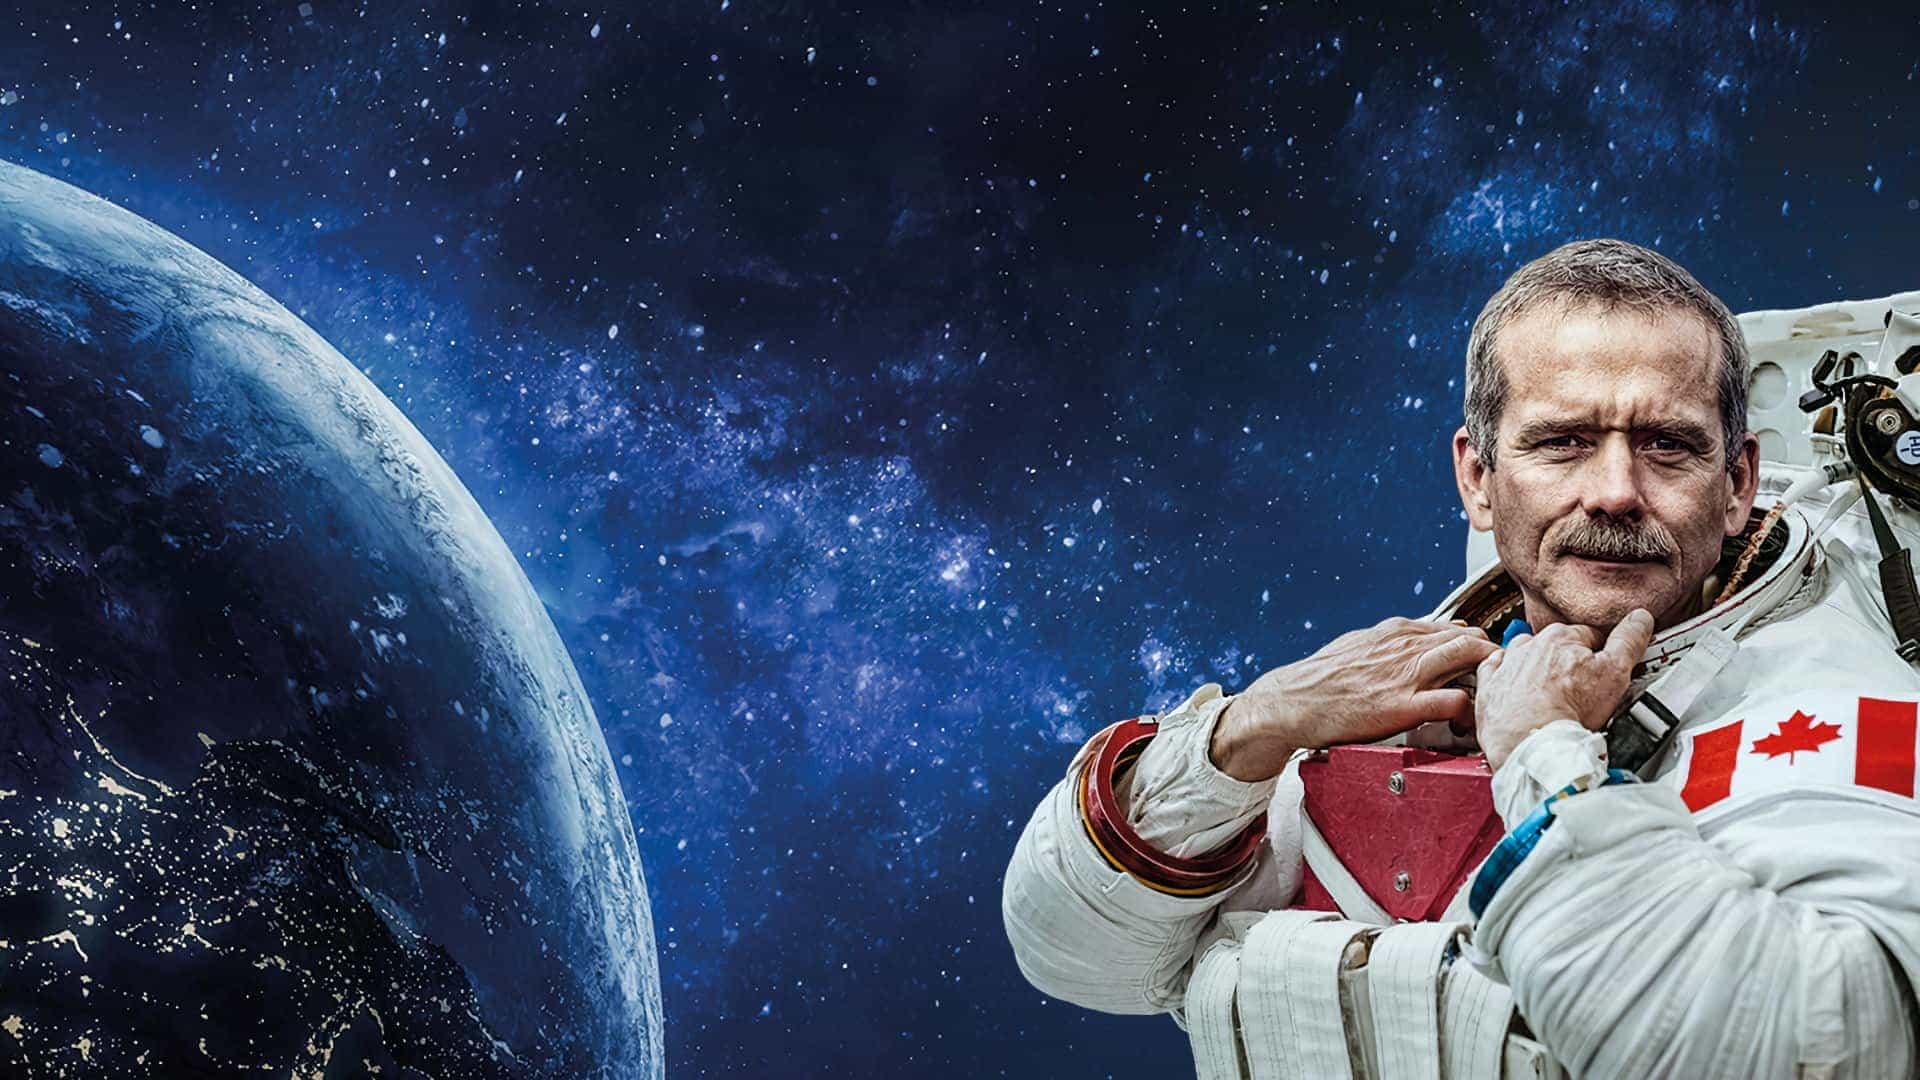 On Earth and Space - Chris Hadfield's Guide To the Cosmos